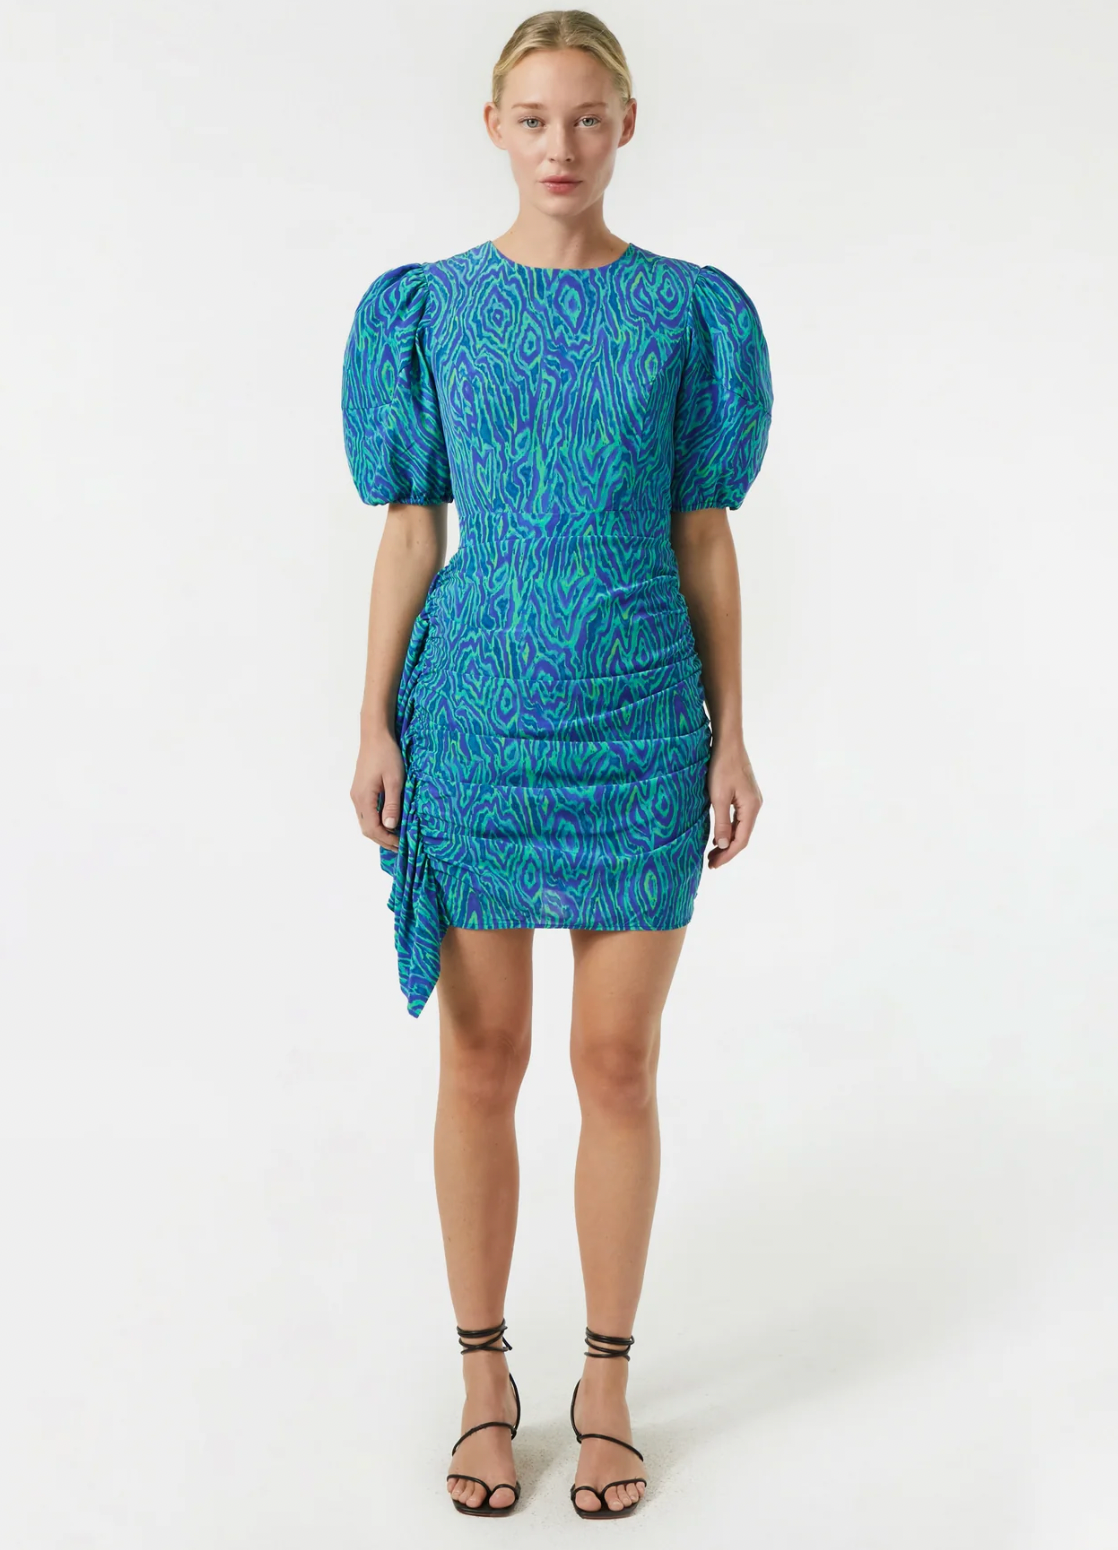 Rhode Pia Dress in Electric Moire